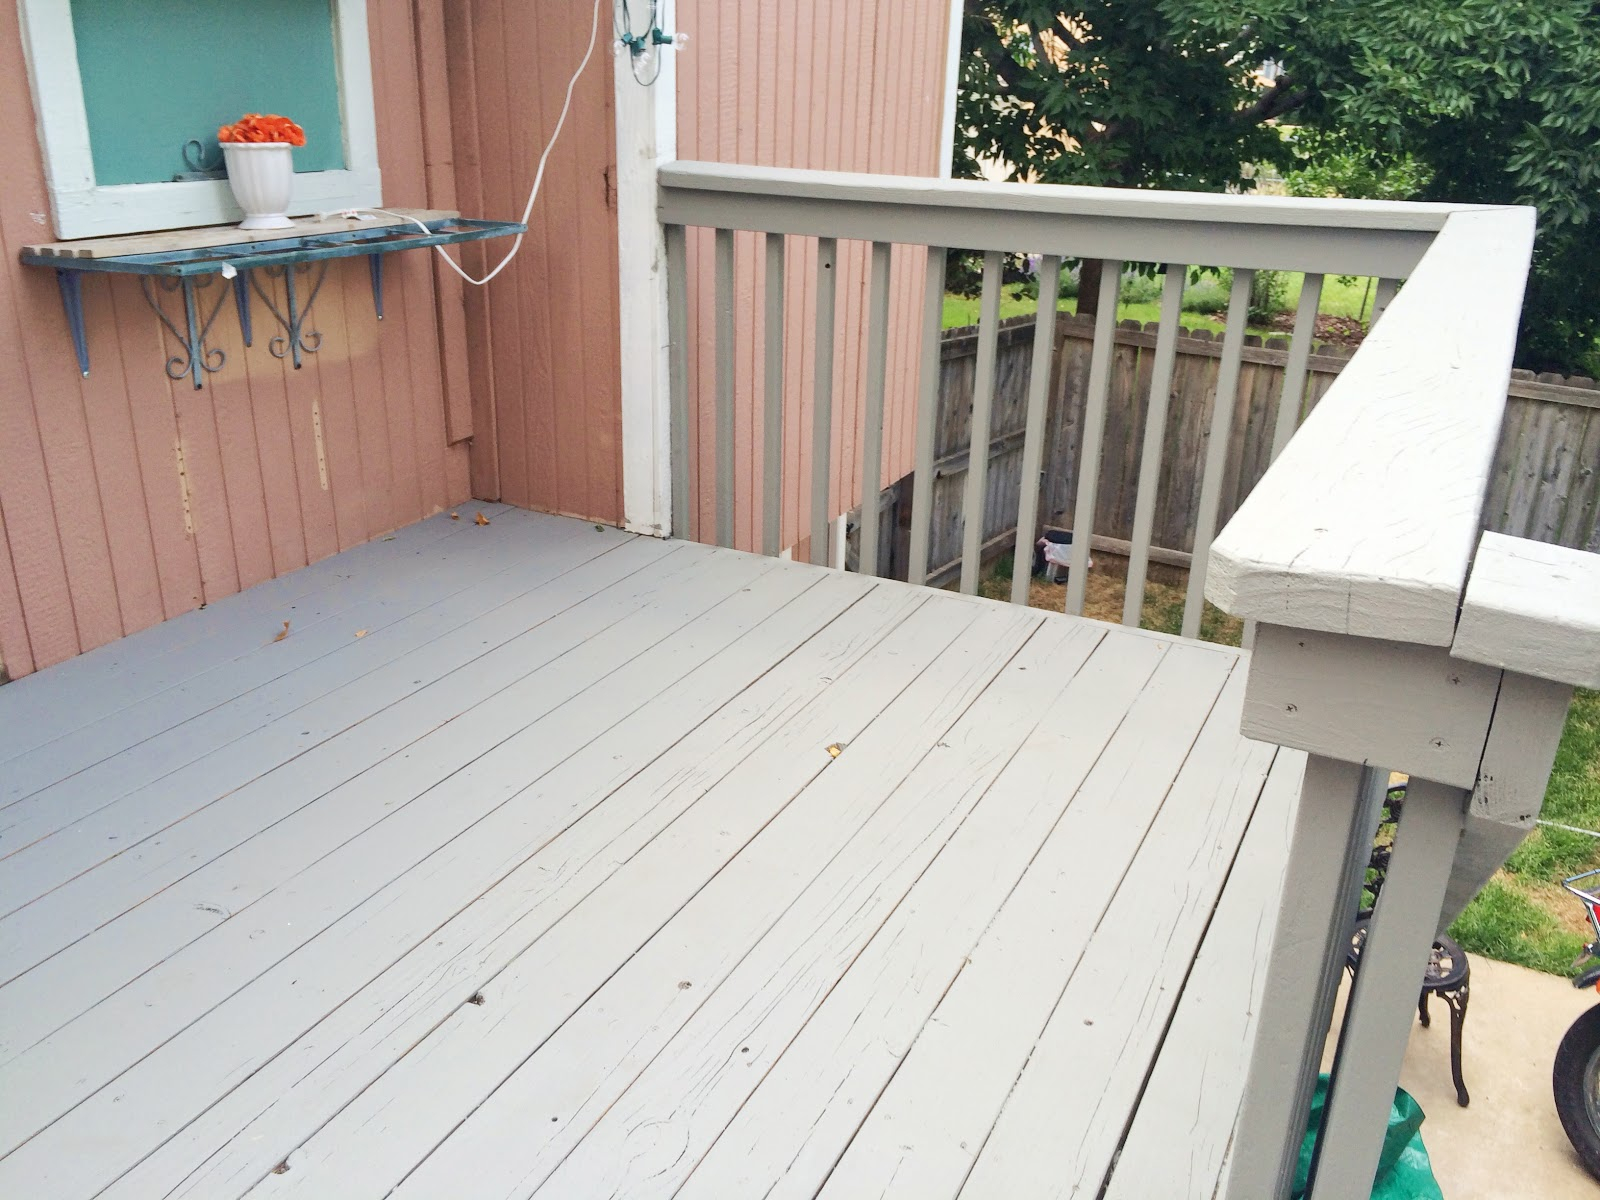 Decks Coating Your Old Wood And Concrete Surfaces With Deck Over within dimensions 1600 X 1200